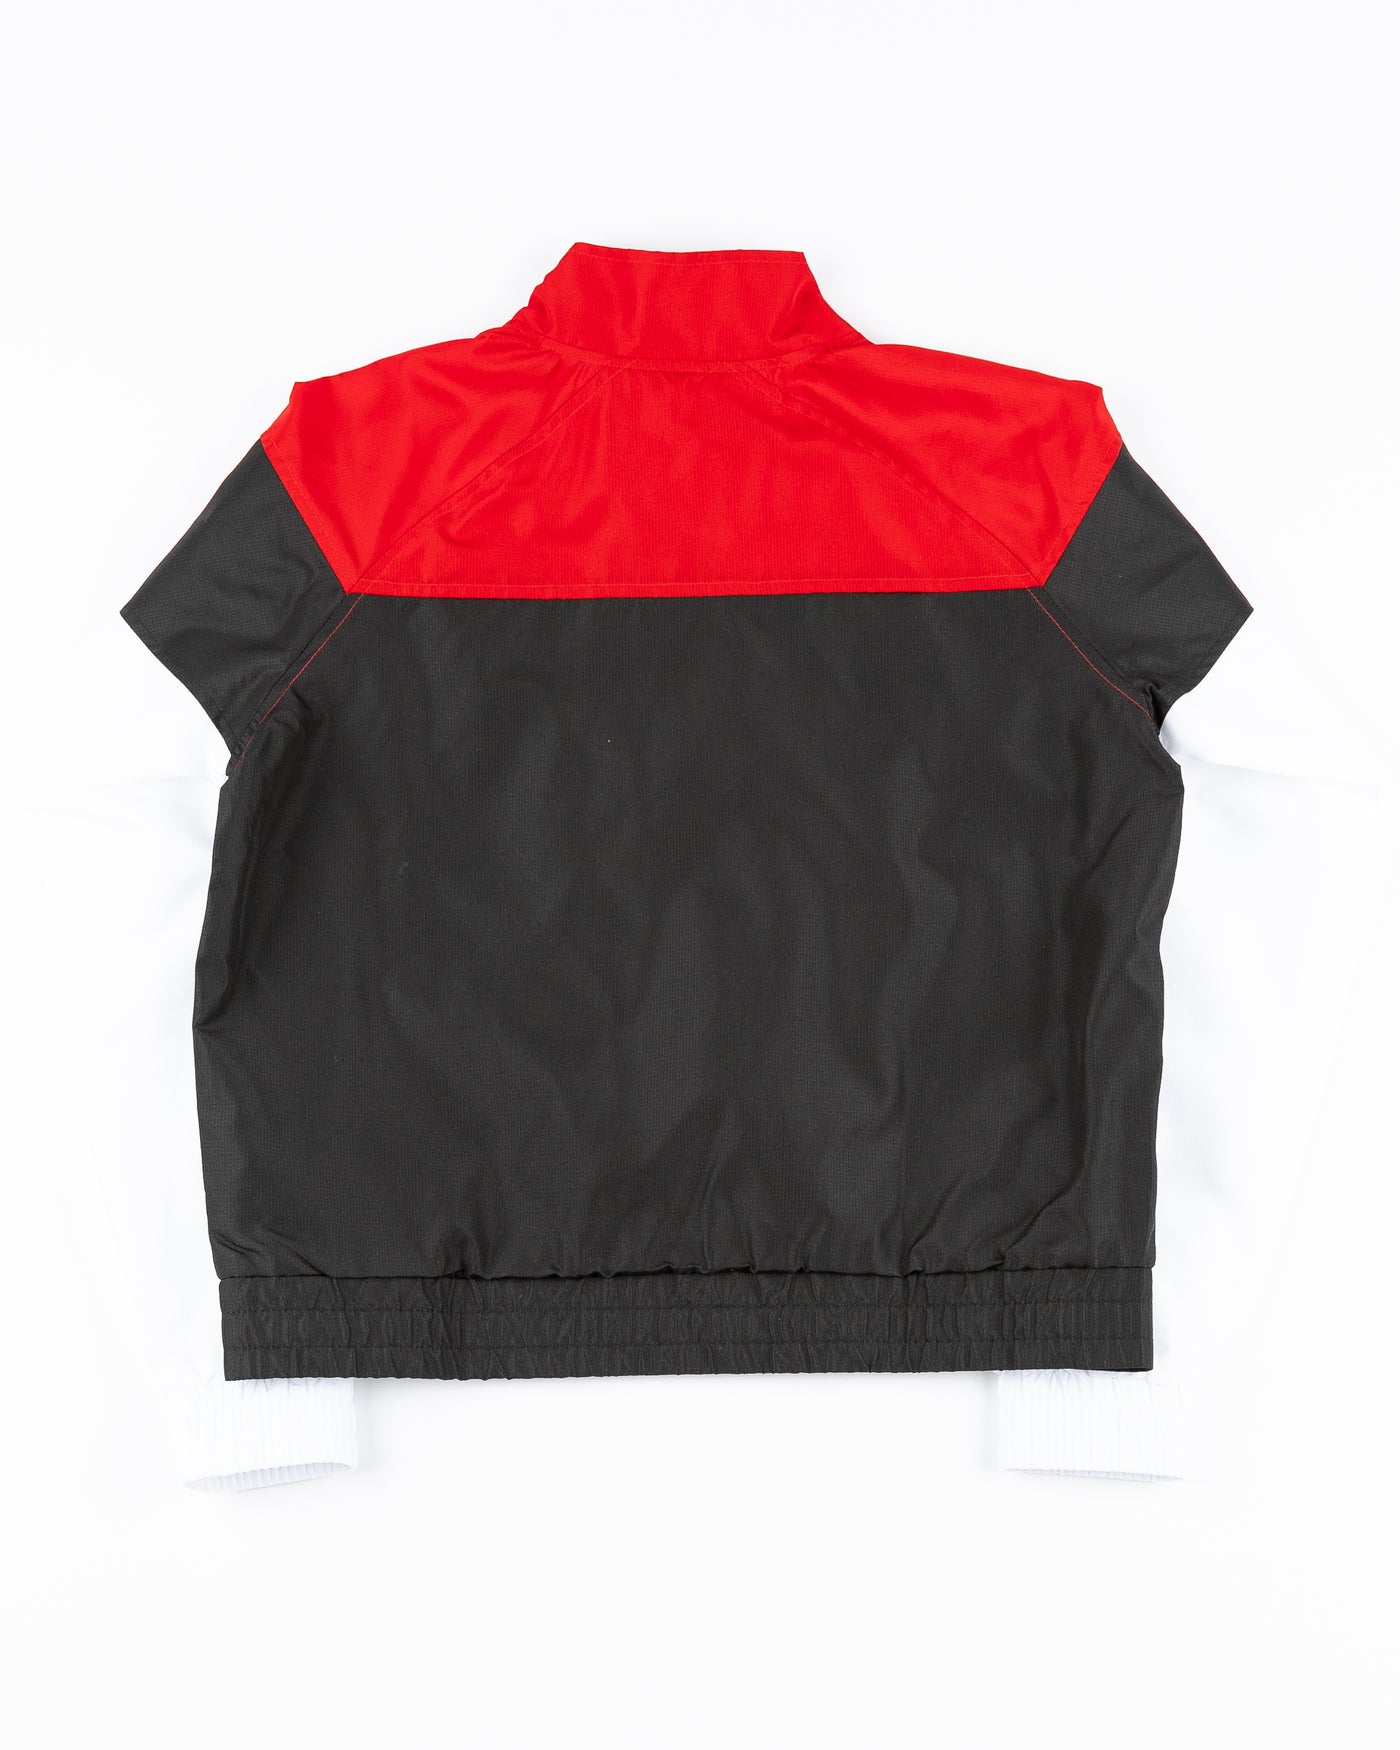 color block New Era ladies zip up track jacket with Chicago Blackhawks primary logo and wordmark on left arm - back lay flat